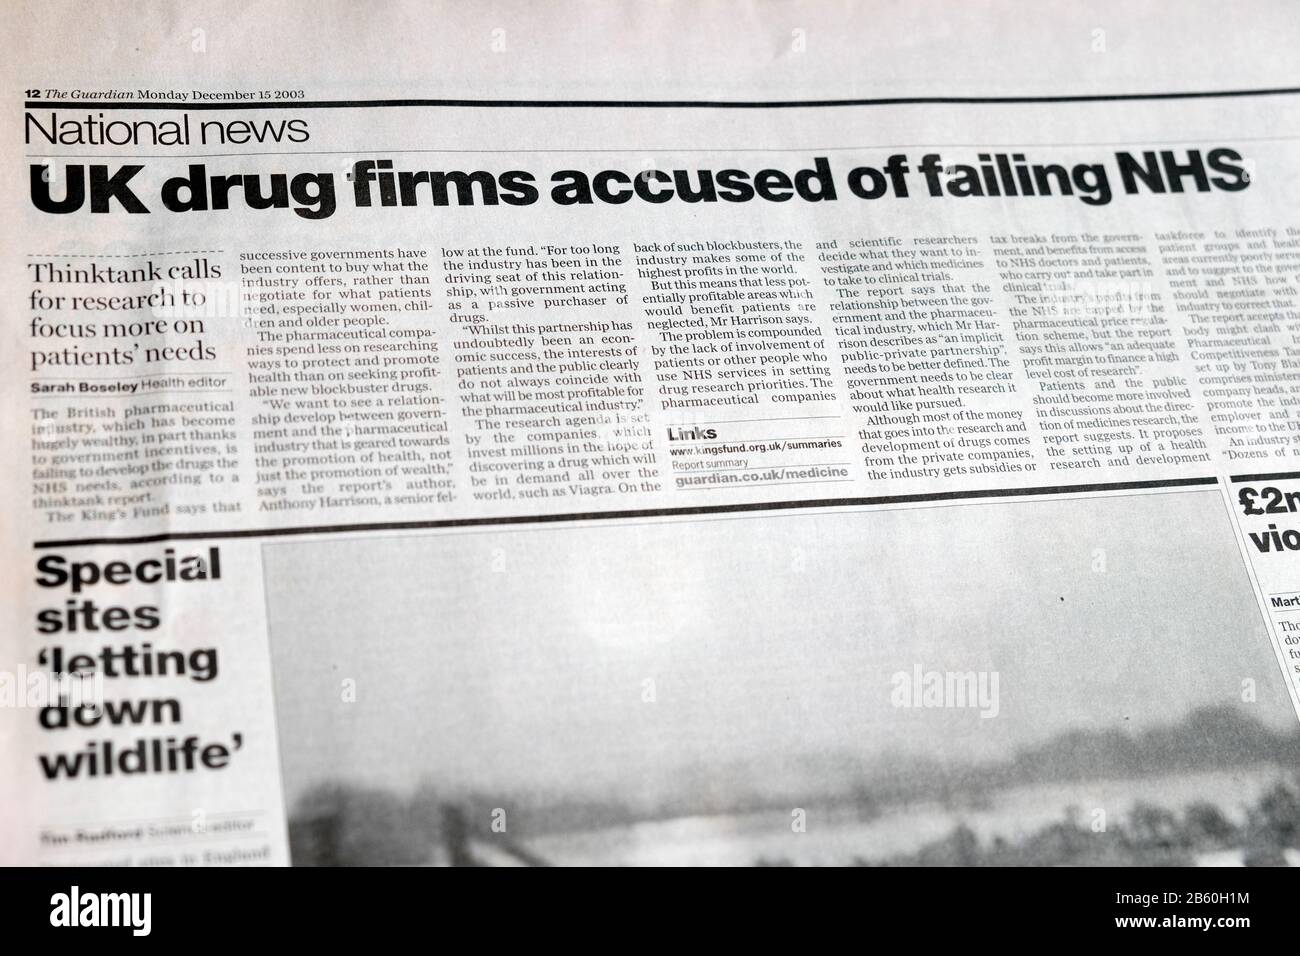 'UK drug firms accused of failing NHS' inside page National section Guardian newspaper headline on 15 December 2003 London England UIK Stock Photo